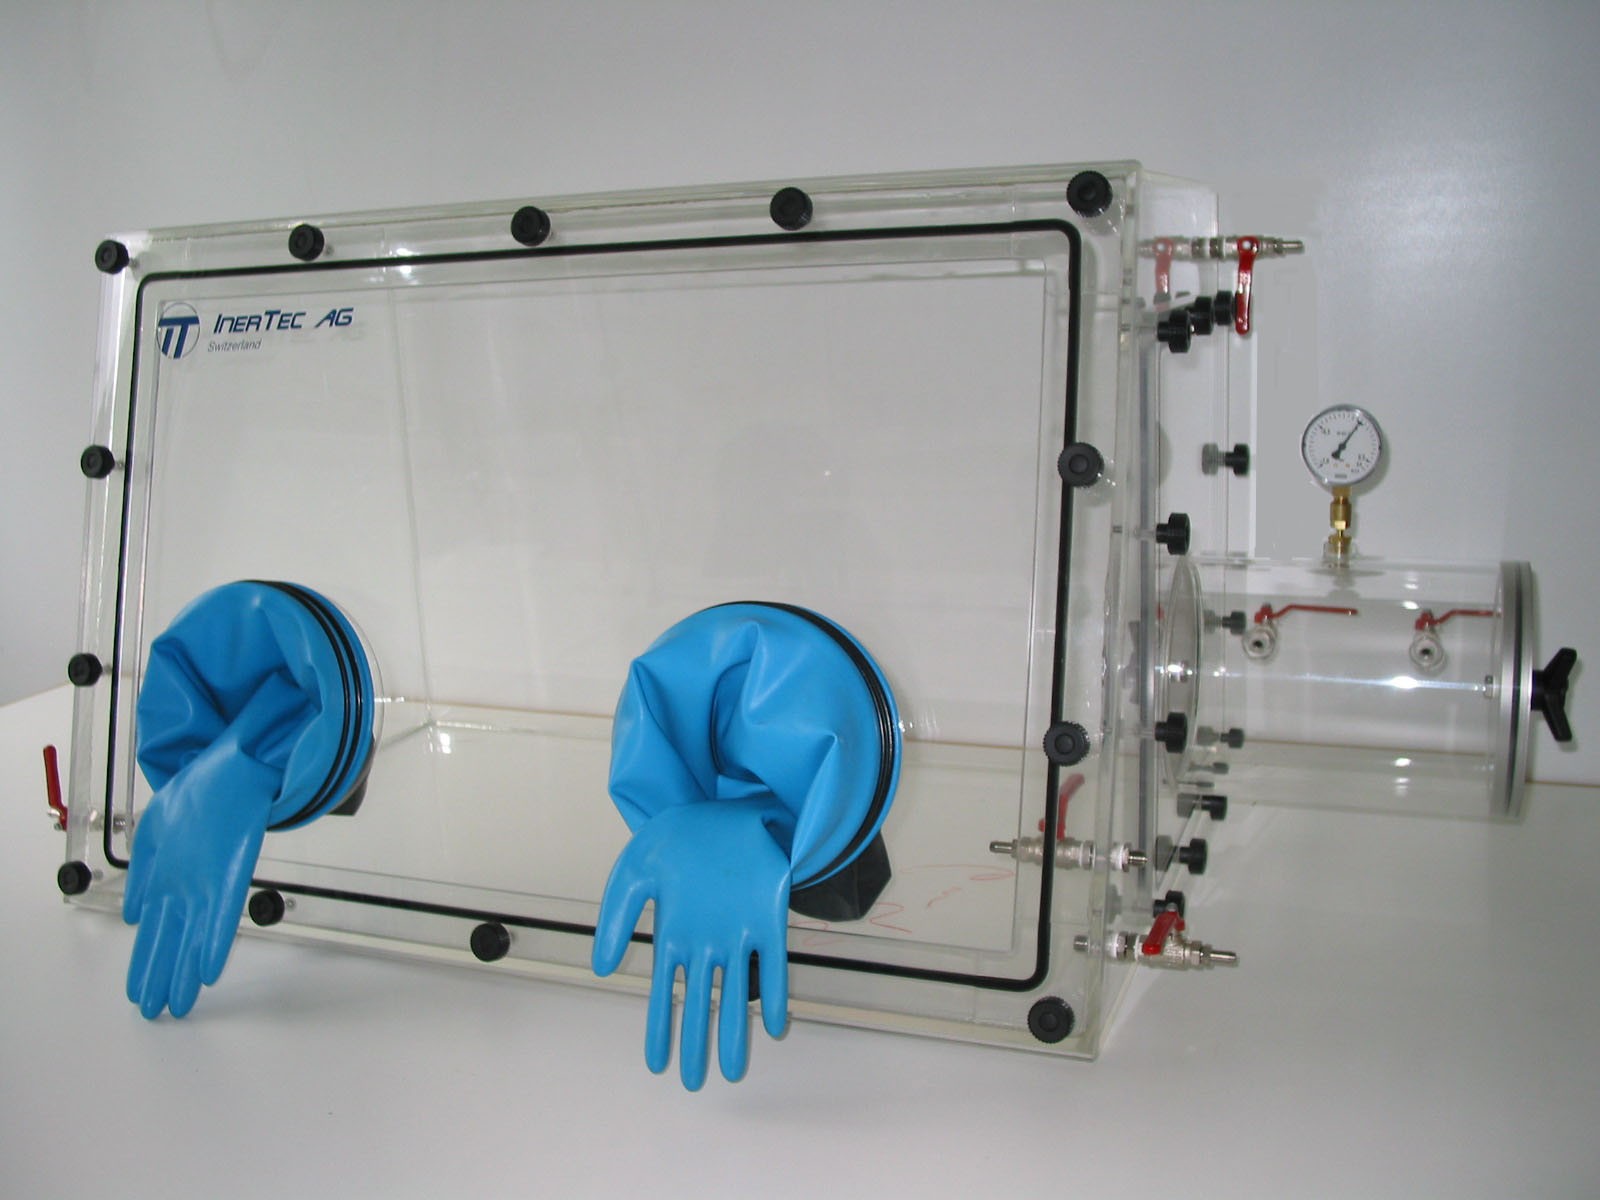 Glovebox made of acrylic&gt; Gas filling: automatic flushing with pressure control, front design: swivels upwards, side design: removable flange Control: oxygen and humidity regulator with data logger